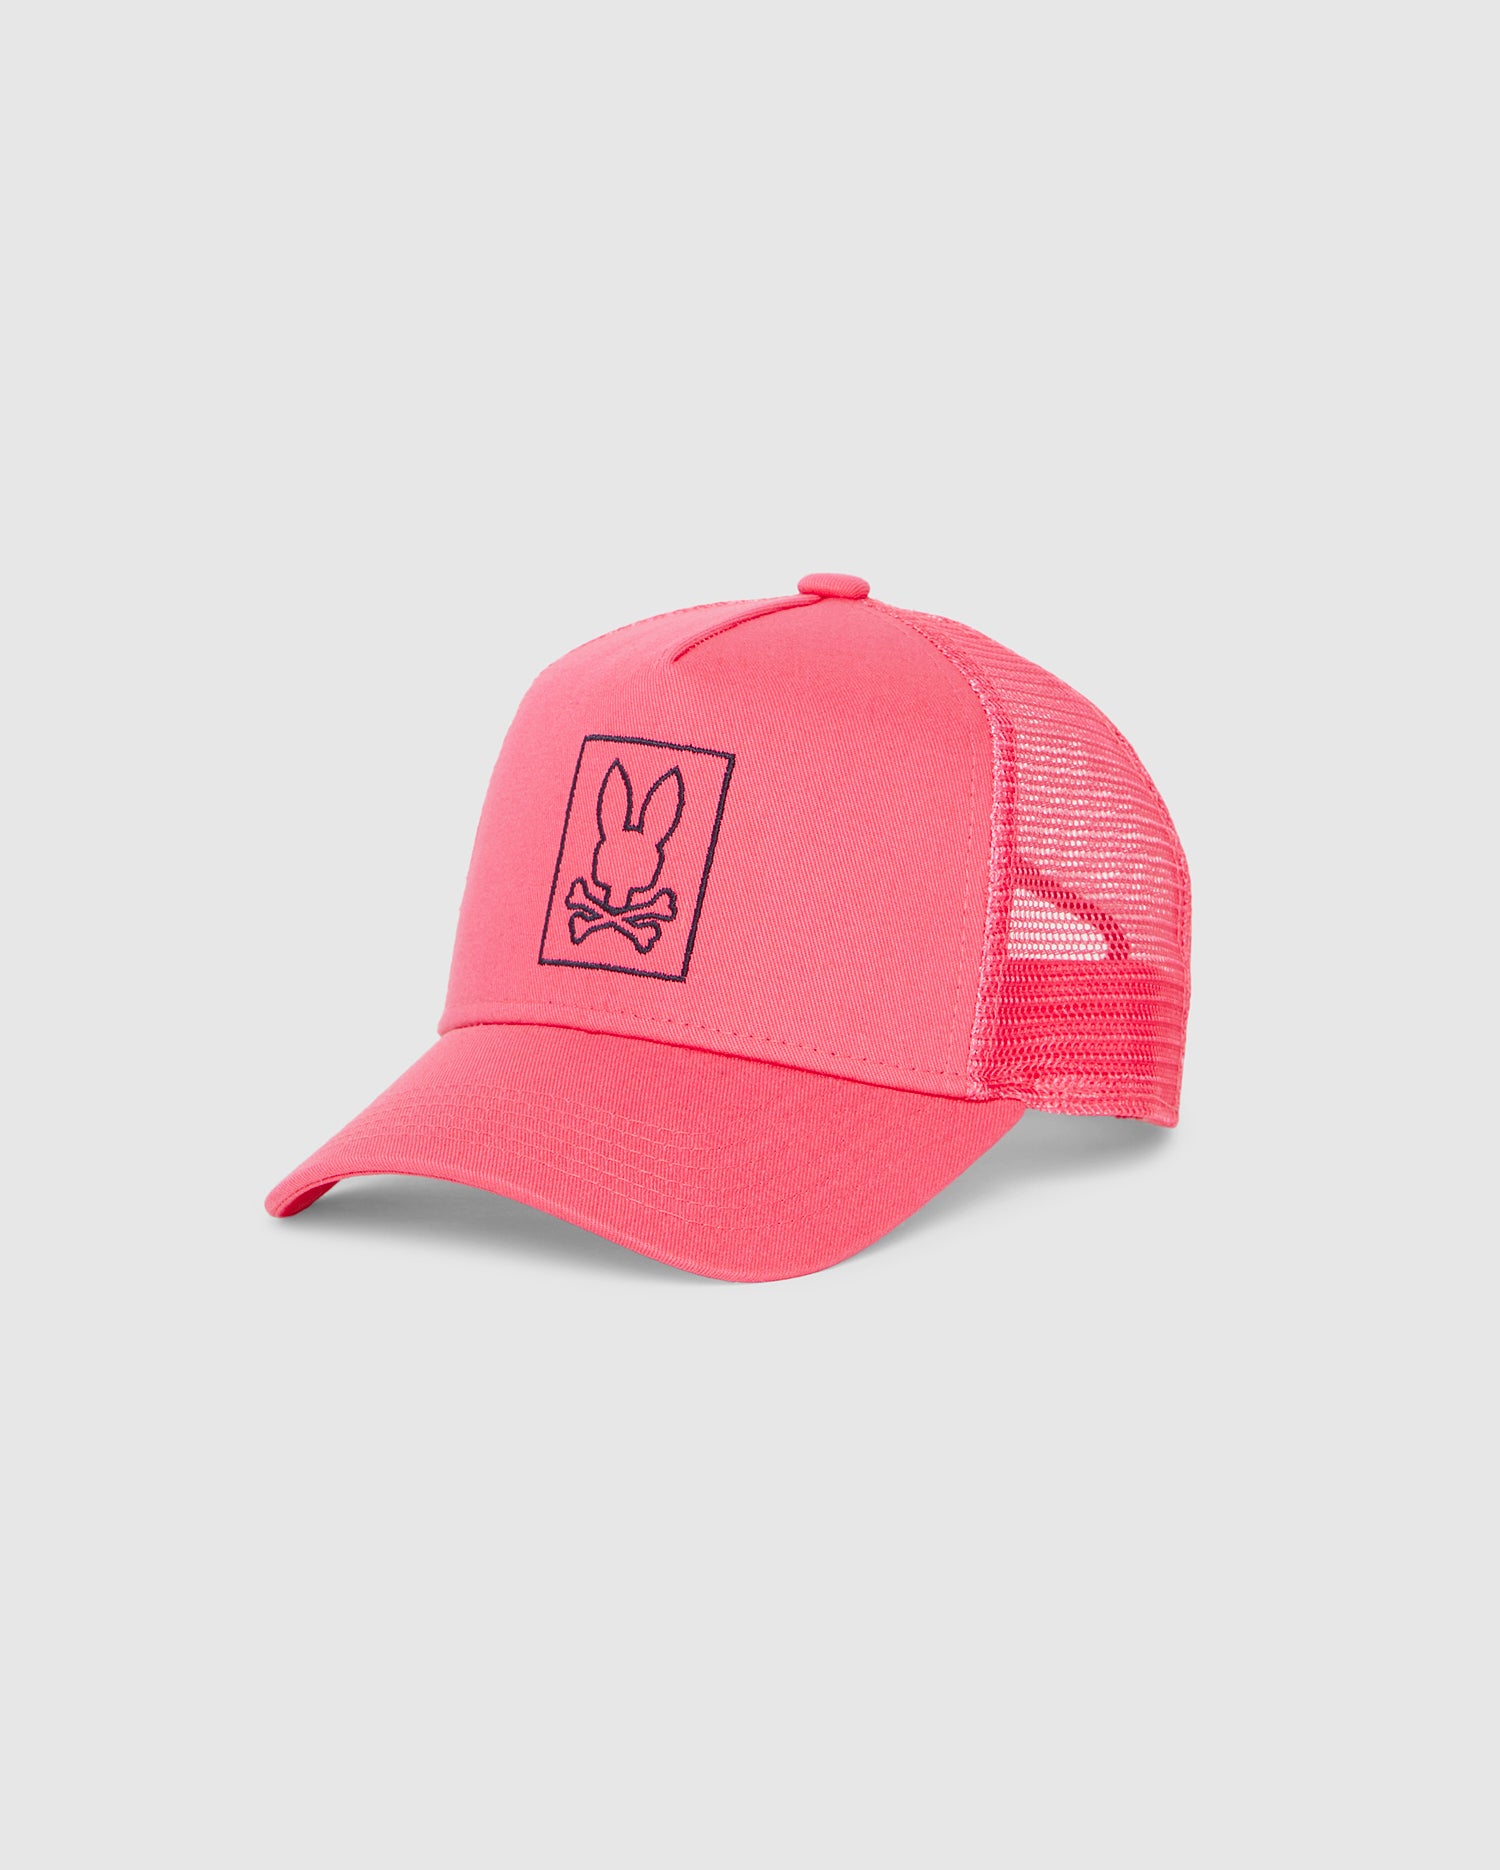 A bright pink Psycho Bunny KIDS LIVINGSTON TRUCKER CAP - B0A401B200 with a mesh back and adjustable snapback strap. The front of the hat features an embroidered bunny design of a bunny head and crossbones in black within a rectangular outline.